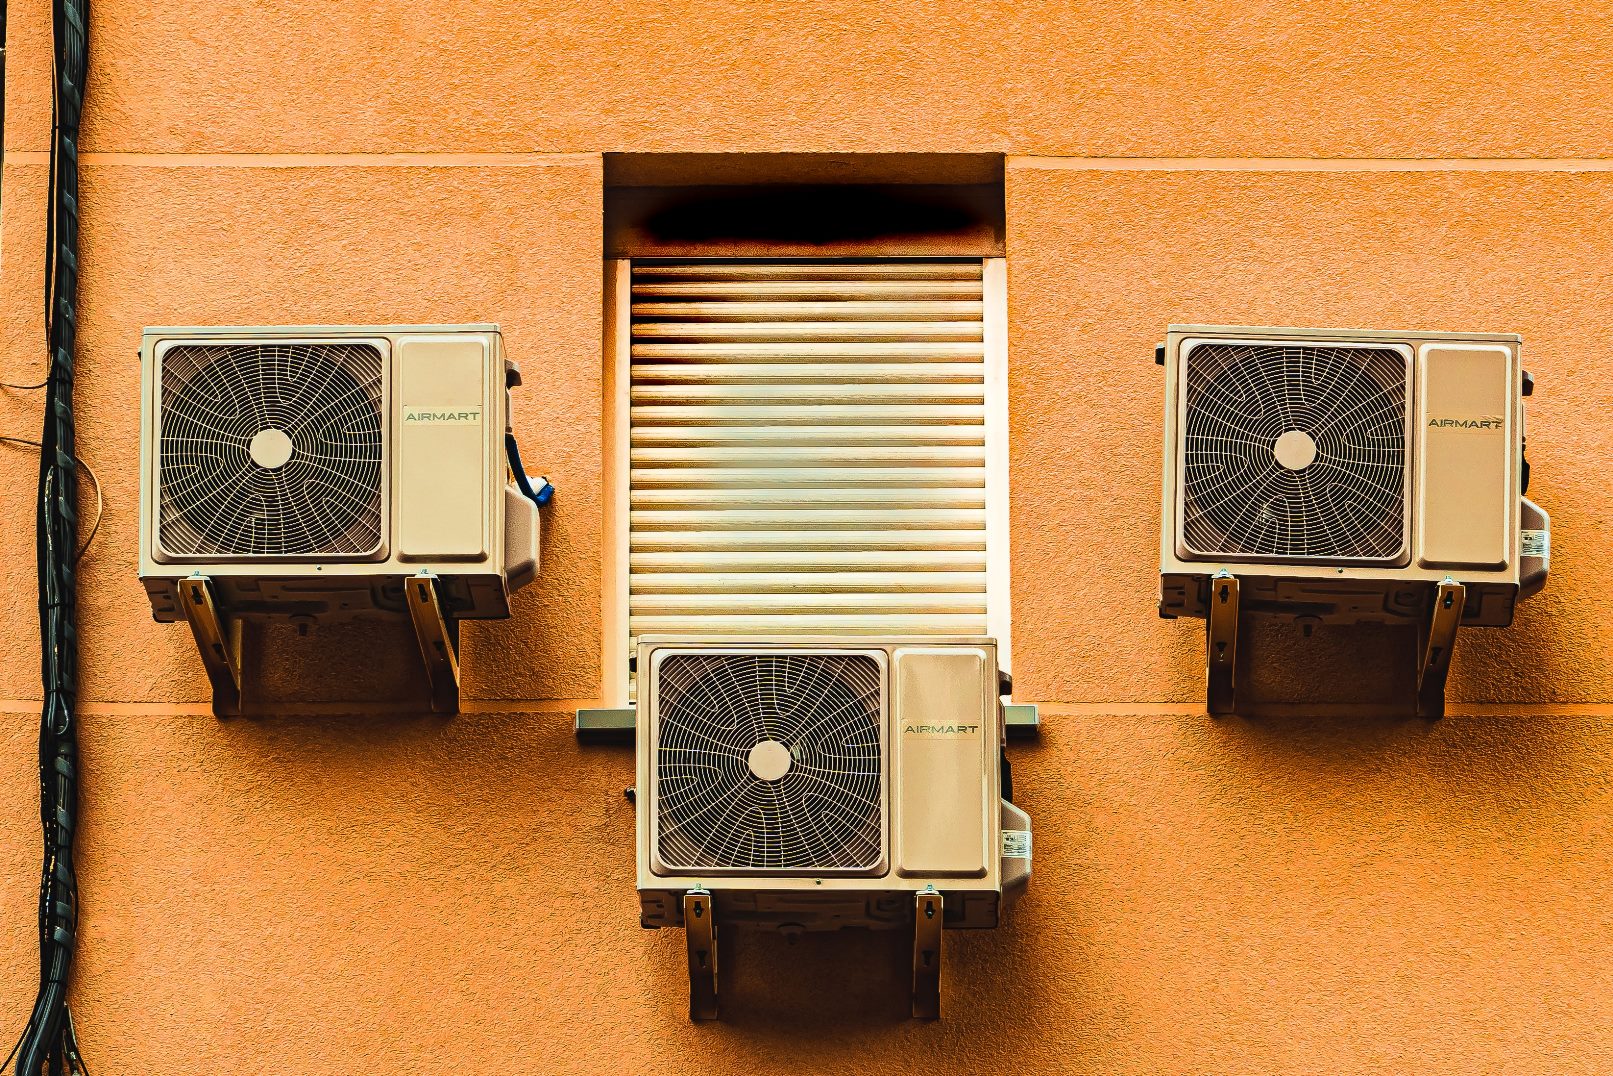 Brazil: air conditioning equipment days of use will double without climate action